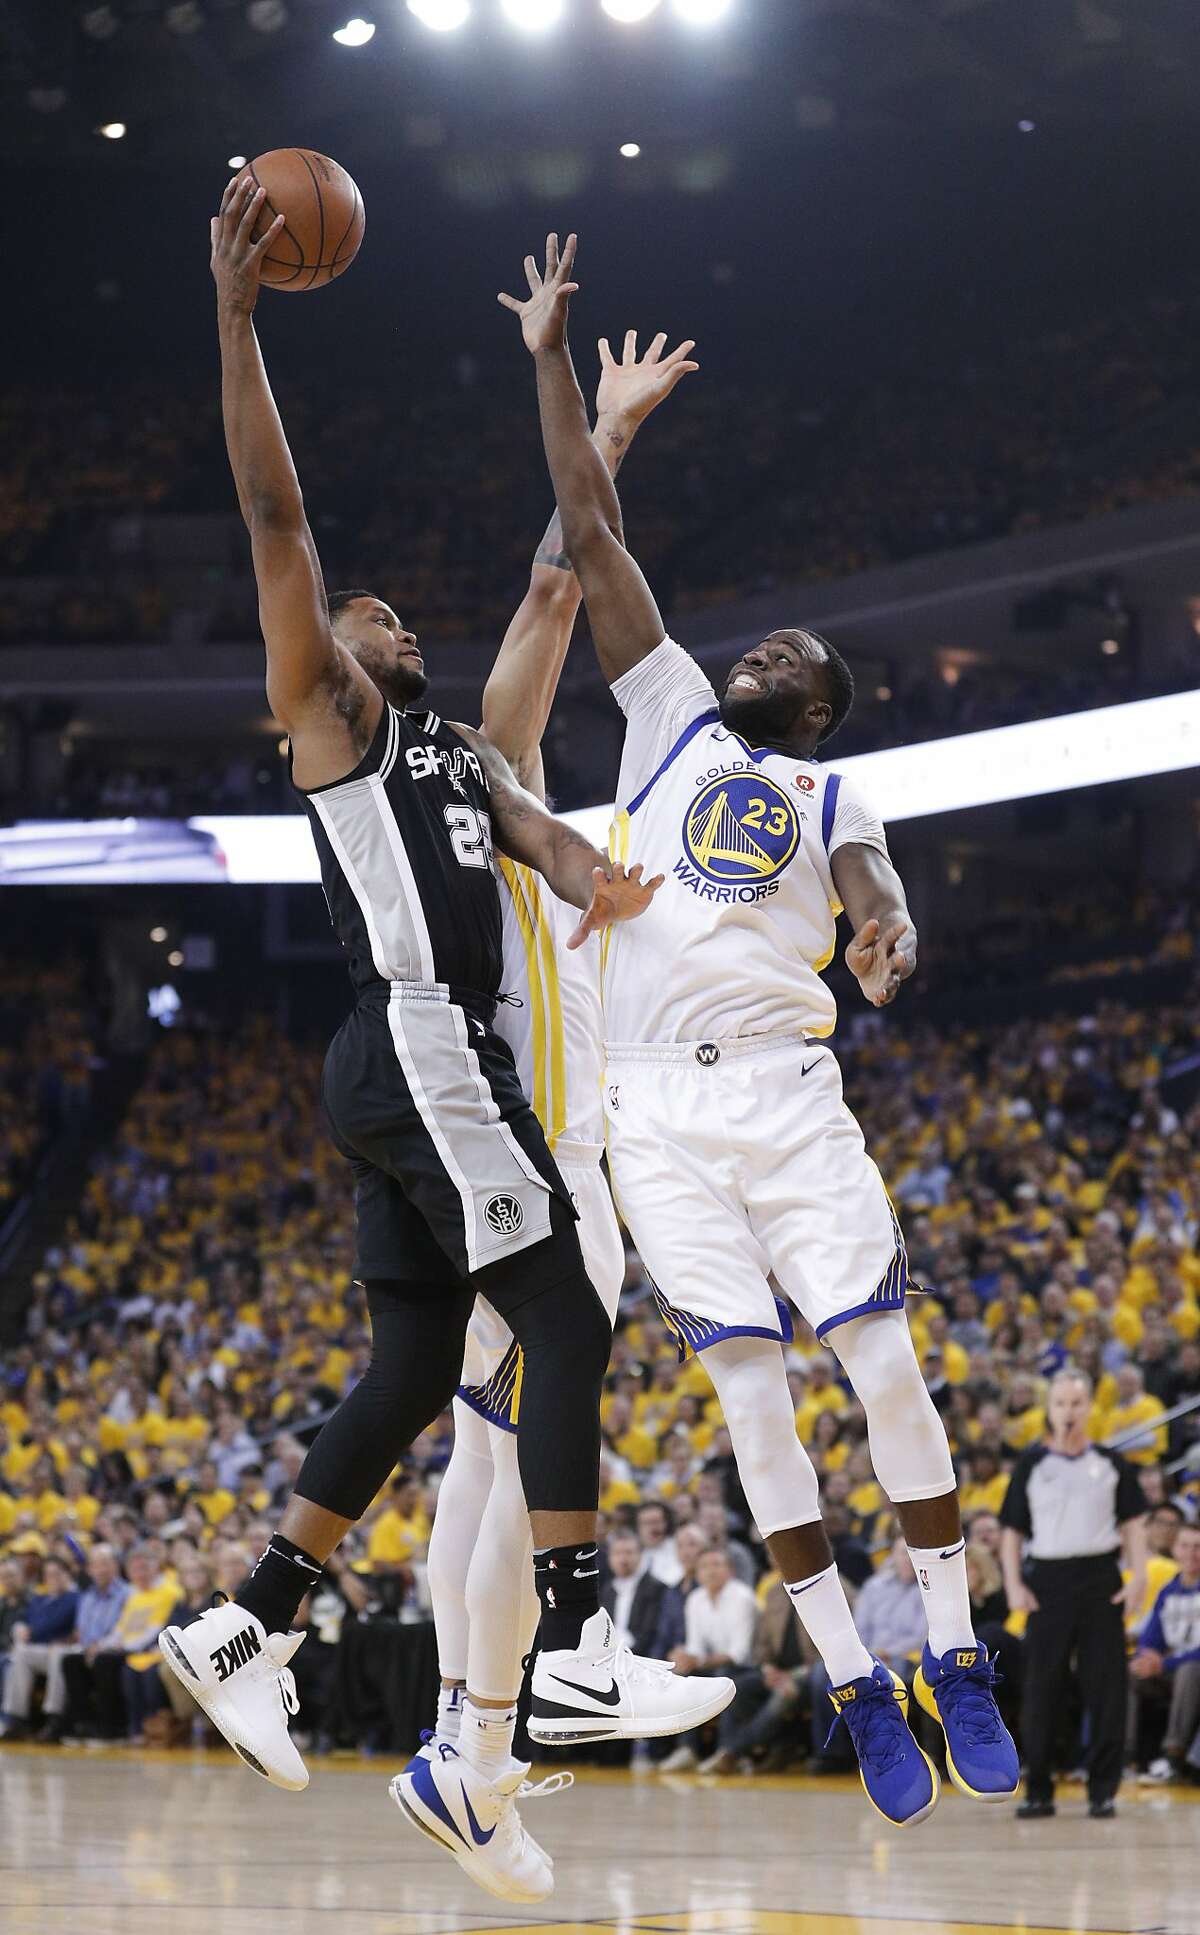 Golden State Warriors' Draymond Green defends against San Antonio Spurs' Rudy Gay in the first quarter during game 5 of round 1 of the Western Conference Finals at Oracle Arena on Tuesday, April 24, 2018 in Oakland, Calif.